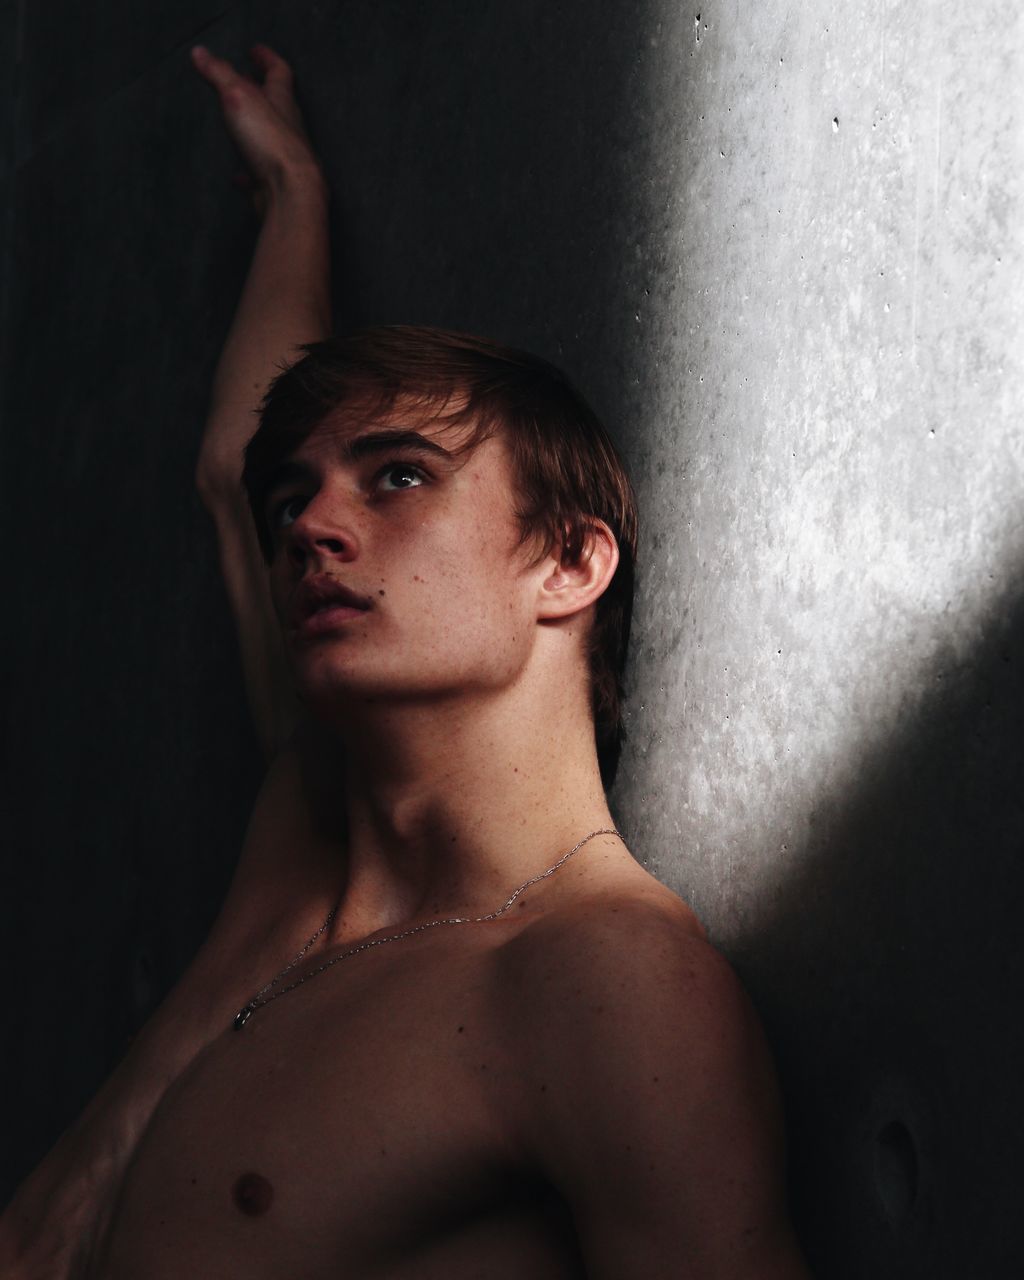 shirtless, indoors, one person, portrait, young adult, real people, lifestyles, front view, headshot, looking at camera, young men, looking, adult, wall - building feature, human body part, standing, studio shot, black background, arms raised, chest, contemplation